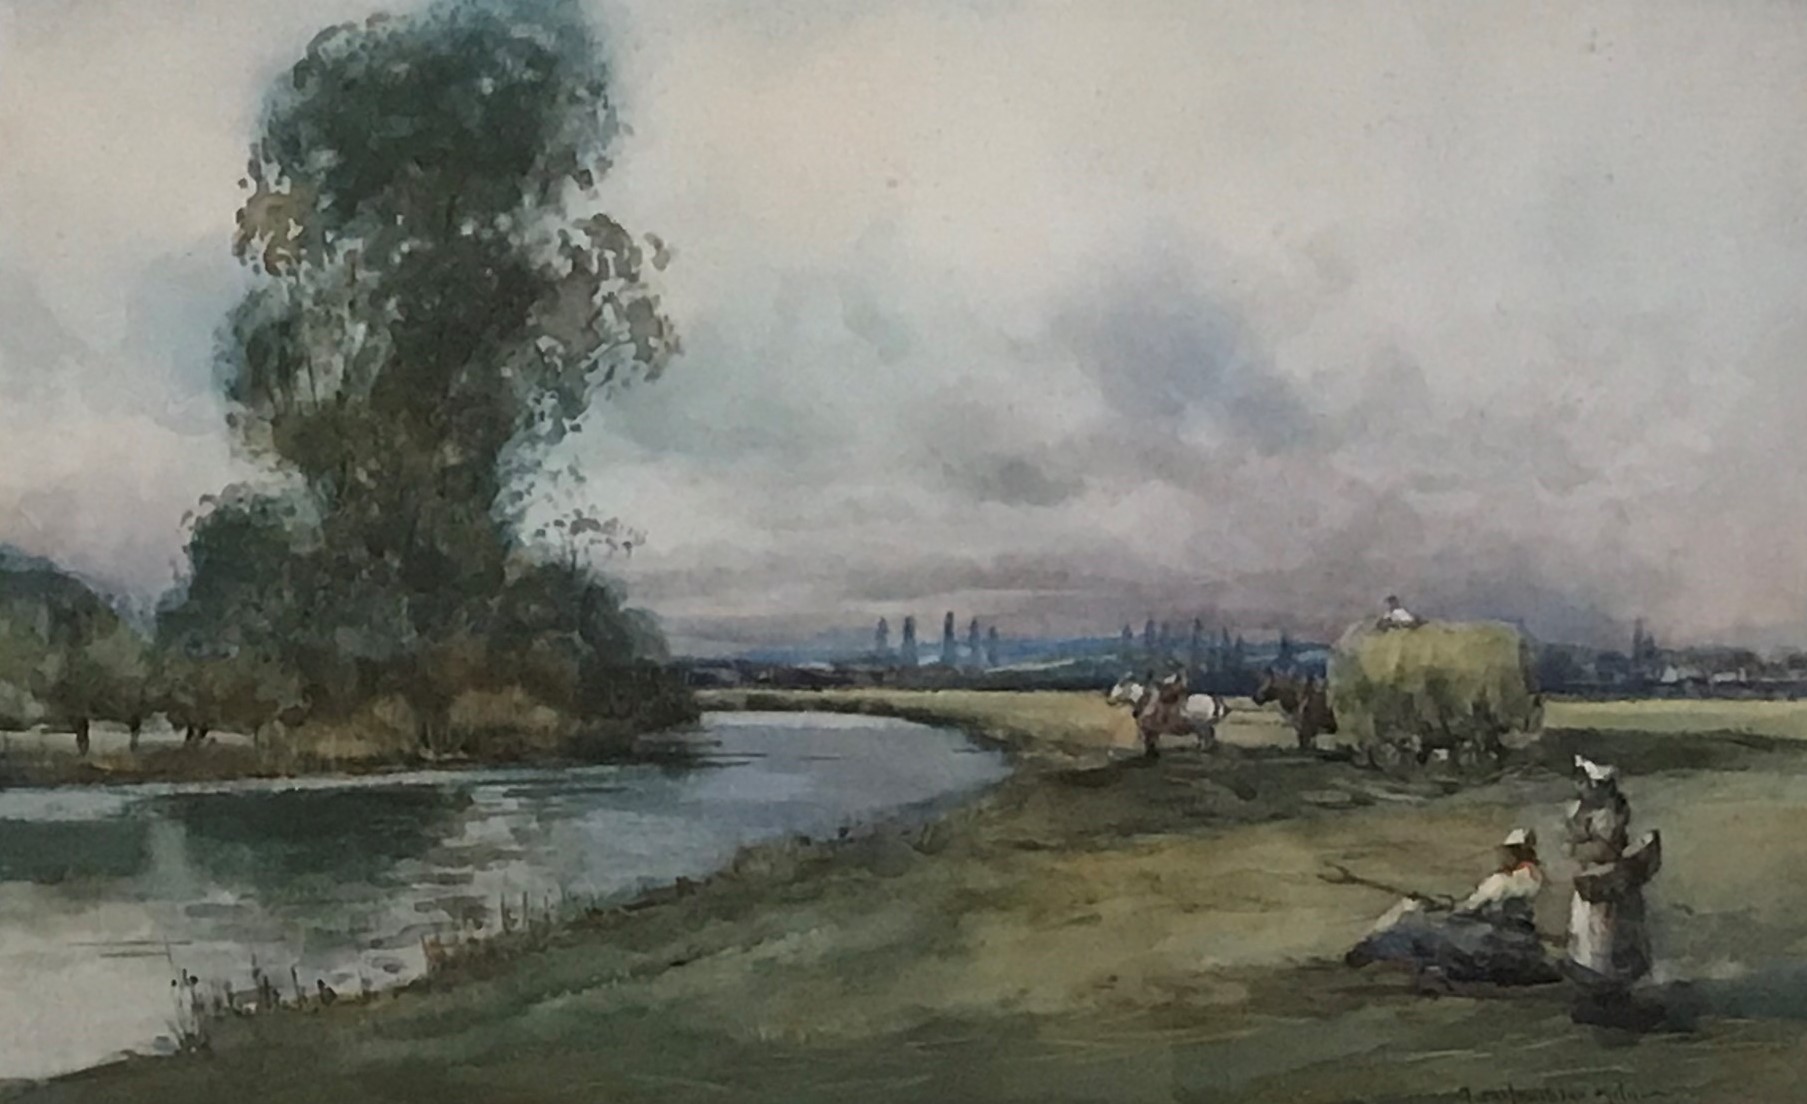 Bend in the River watercolour by Scottish artist John Maclauchlan Milne 1886-1957 Exhib R.S.A, R.A